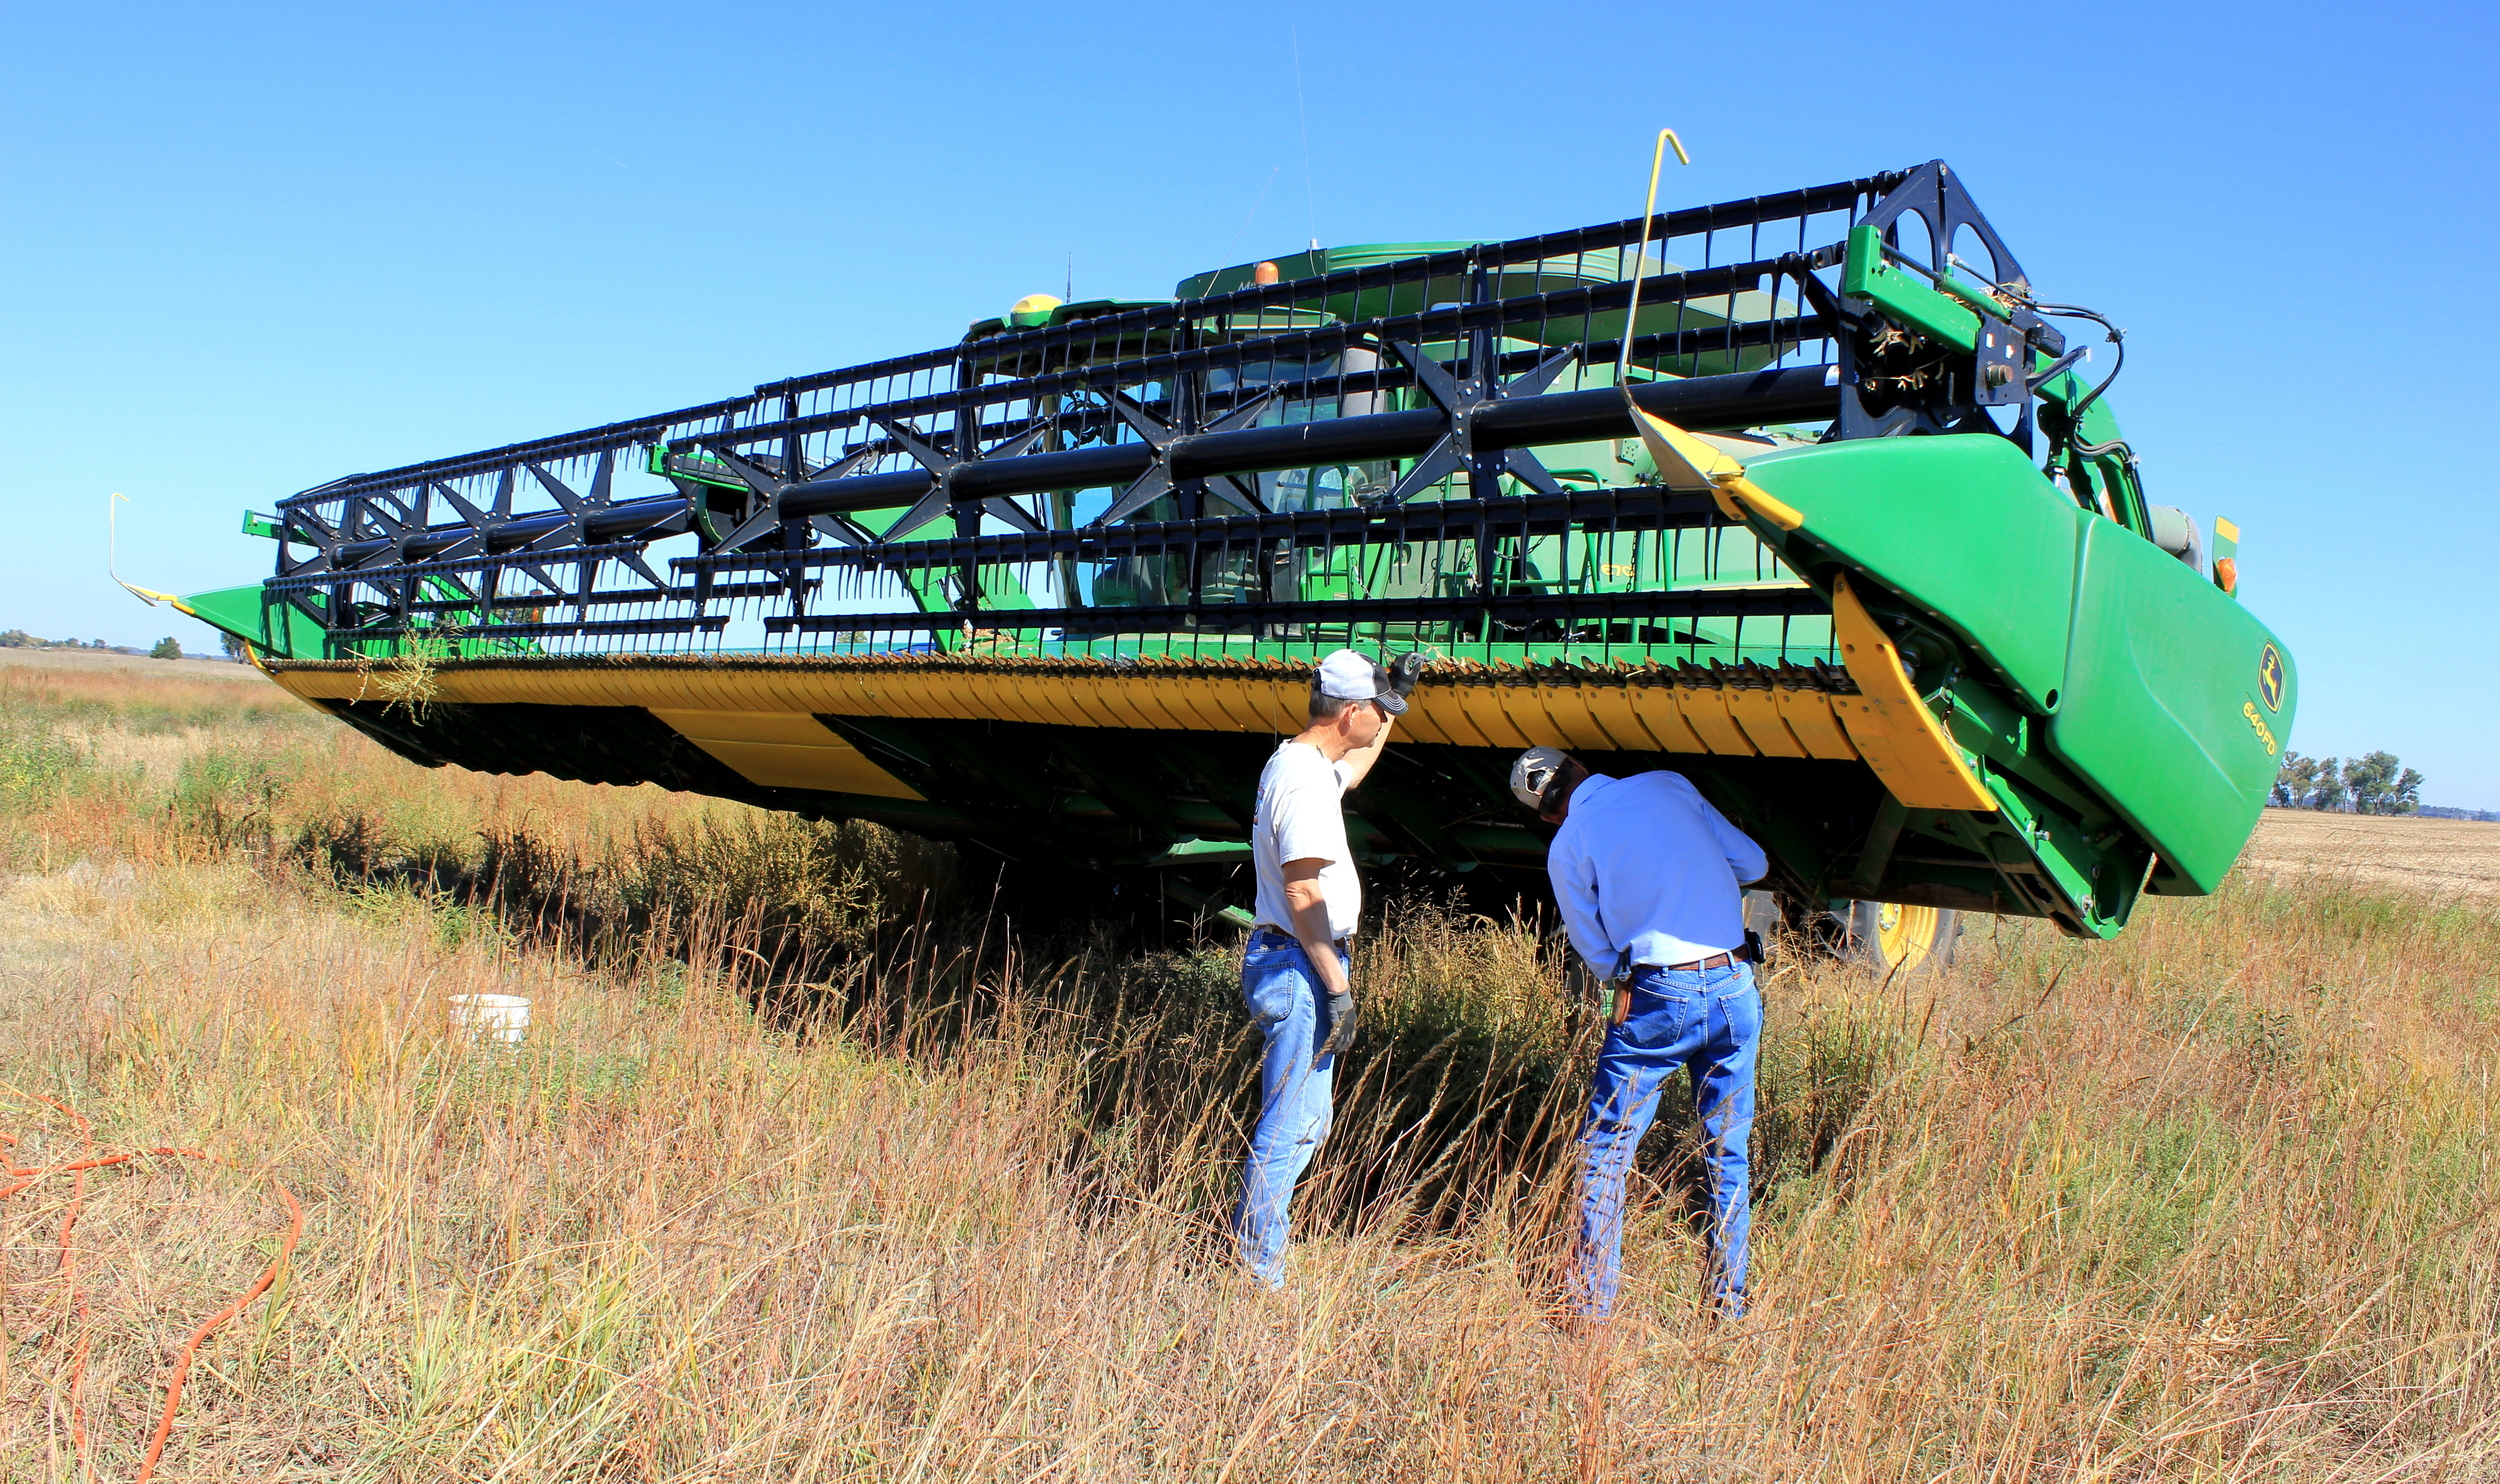 Dad and Vince adjusting the header of the combine to harvest milo